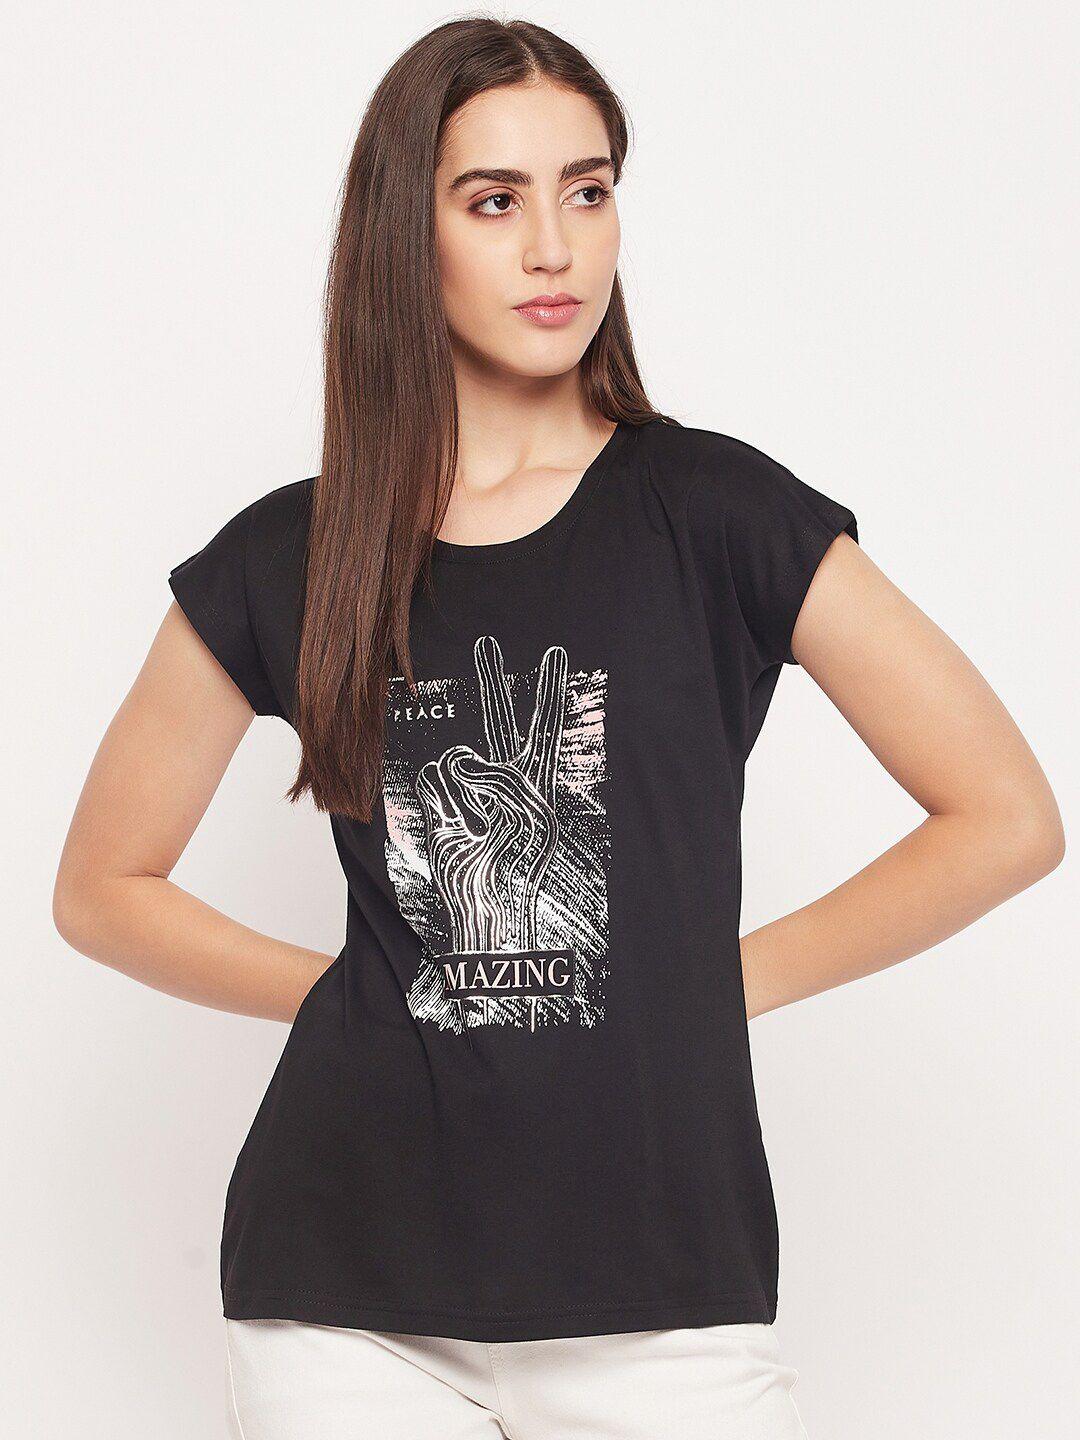 okane graphic printed extended sleeves t-shirt